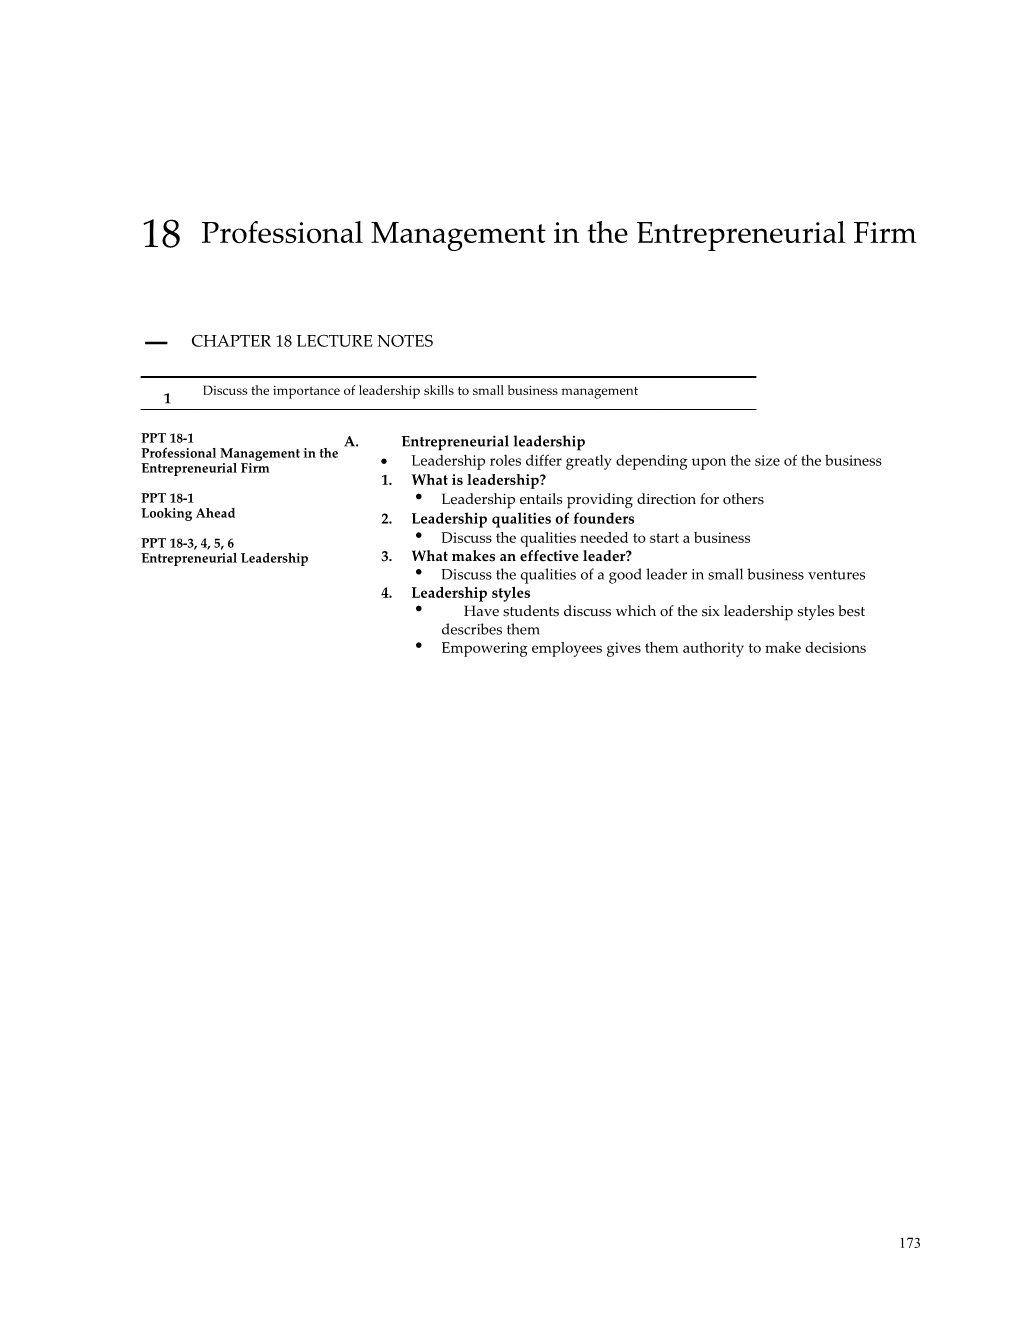 Chapter 18 Professional Management in the Entrepreneurial Firm1